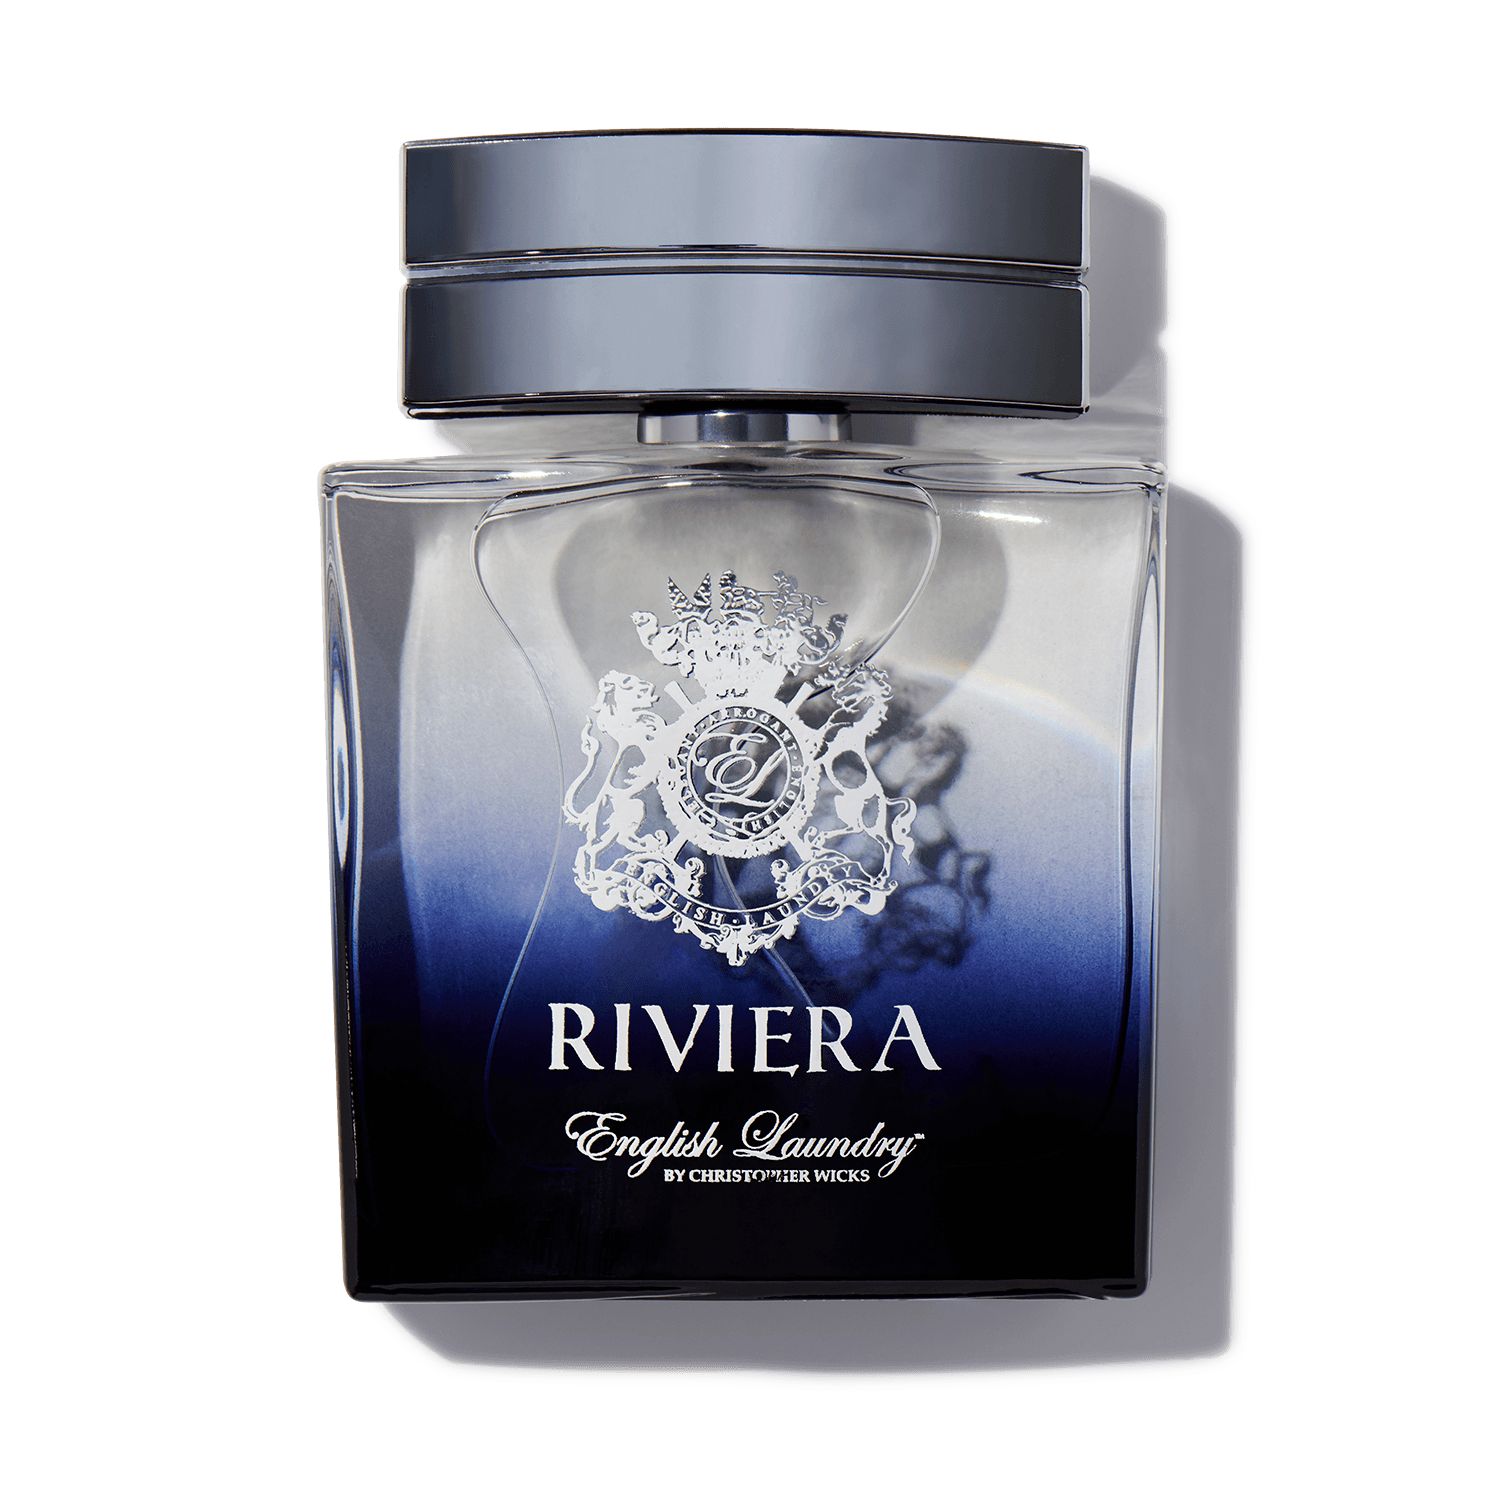 Buy ENGLISH LAUNDRY Riviera cologne at Scentbird for $16.95